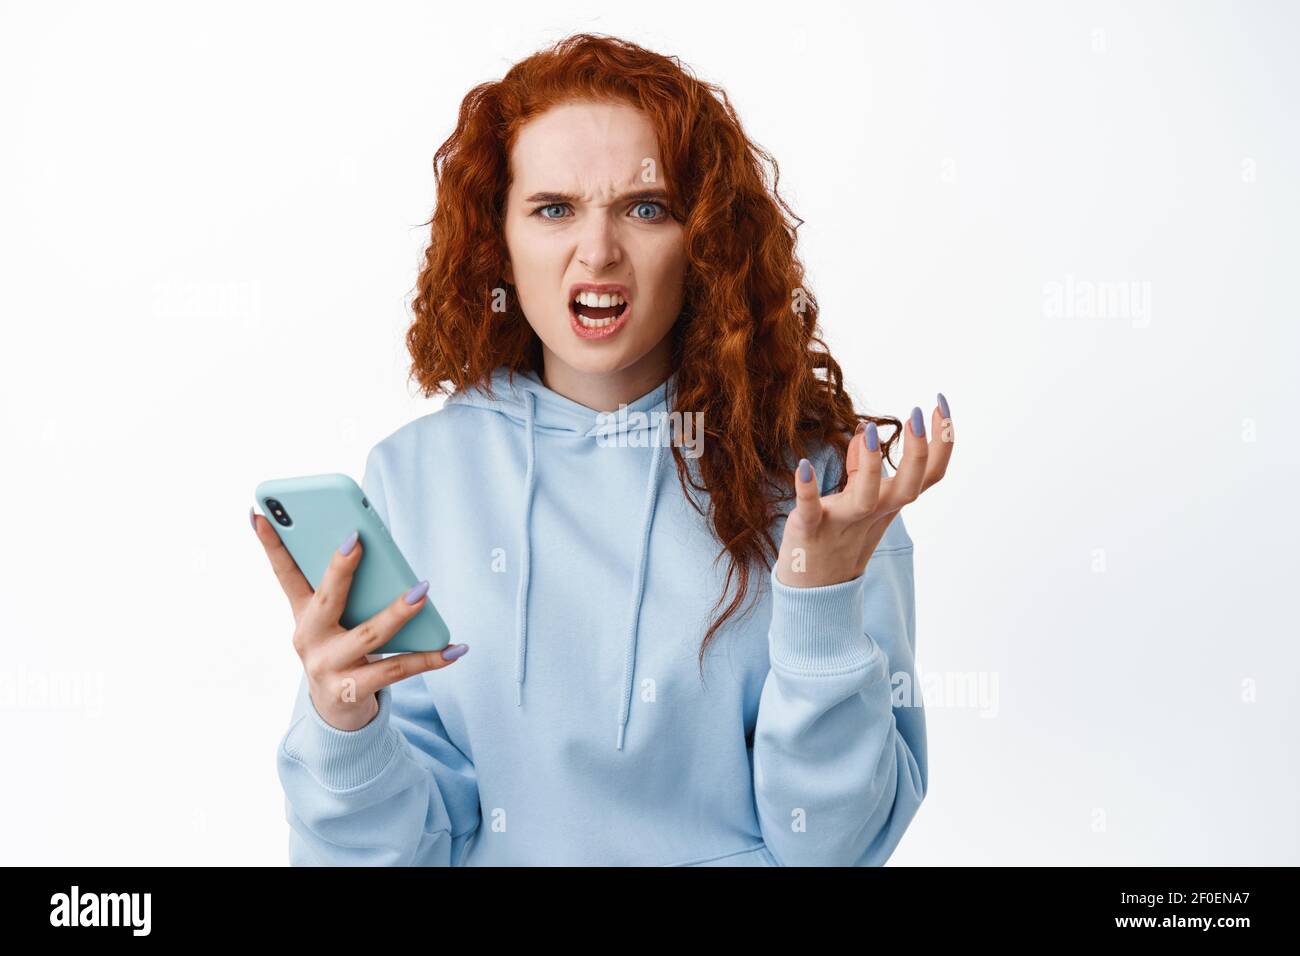 Angry and annoyed redhead girl holding smartphone, frowning and grimacing mad, complaining at something bothering, being dumped by message, white Stock Photo